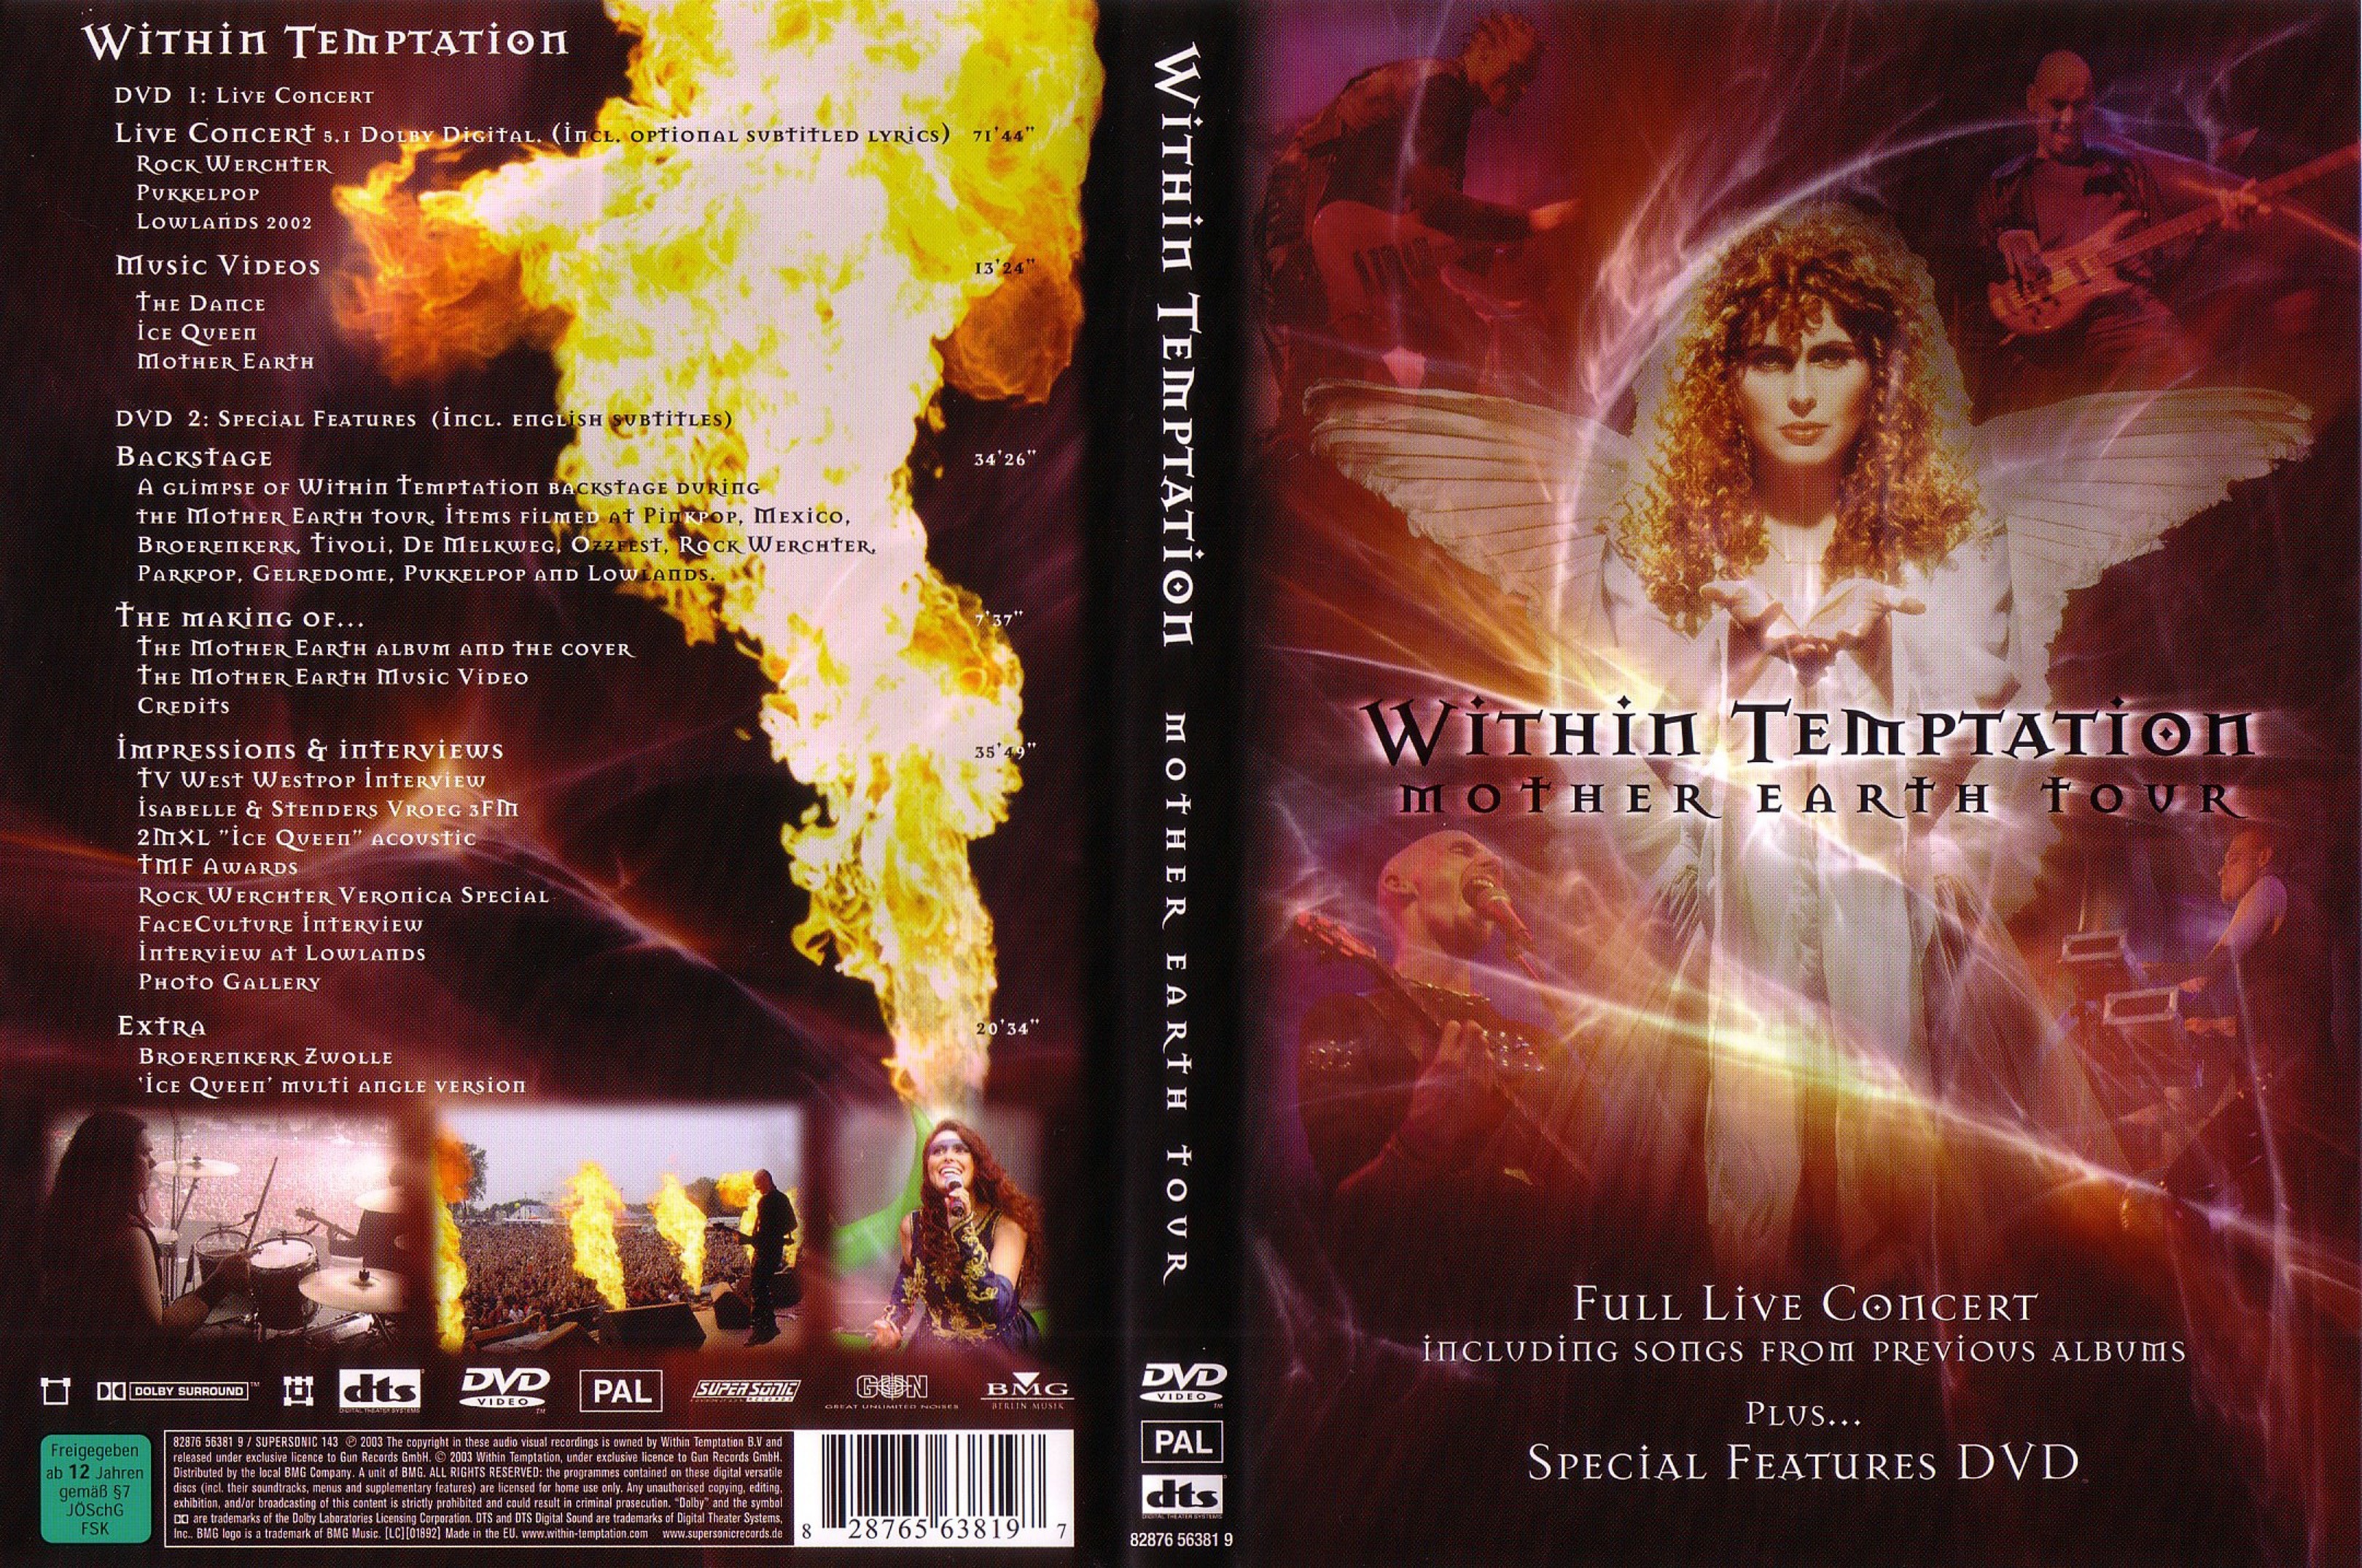 Jaquette DVD Within Temptation Mother Earth Tour